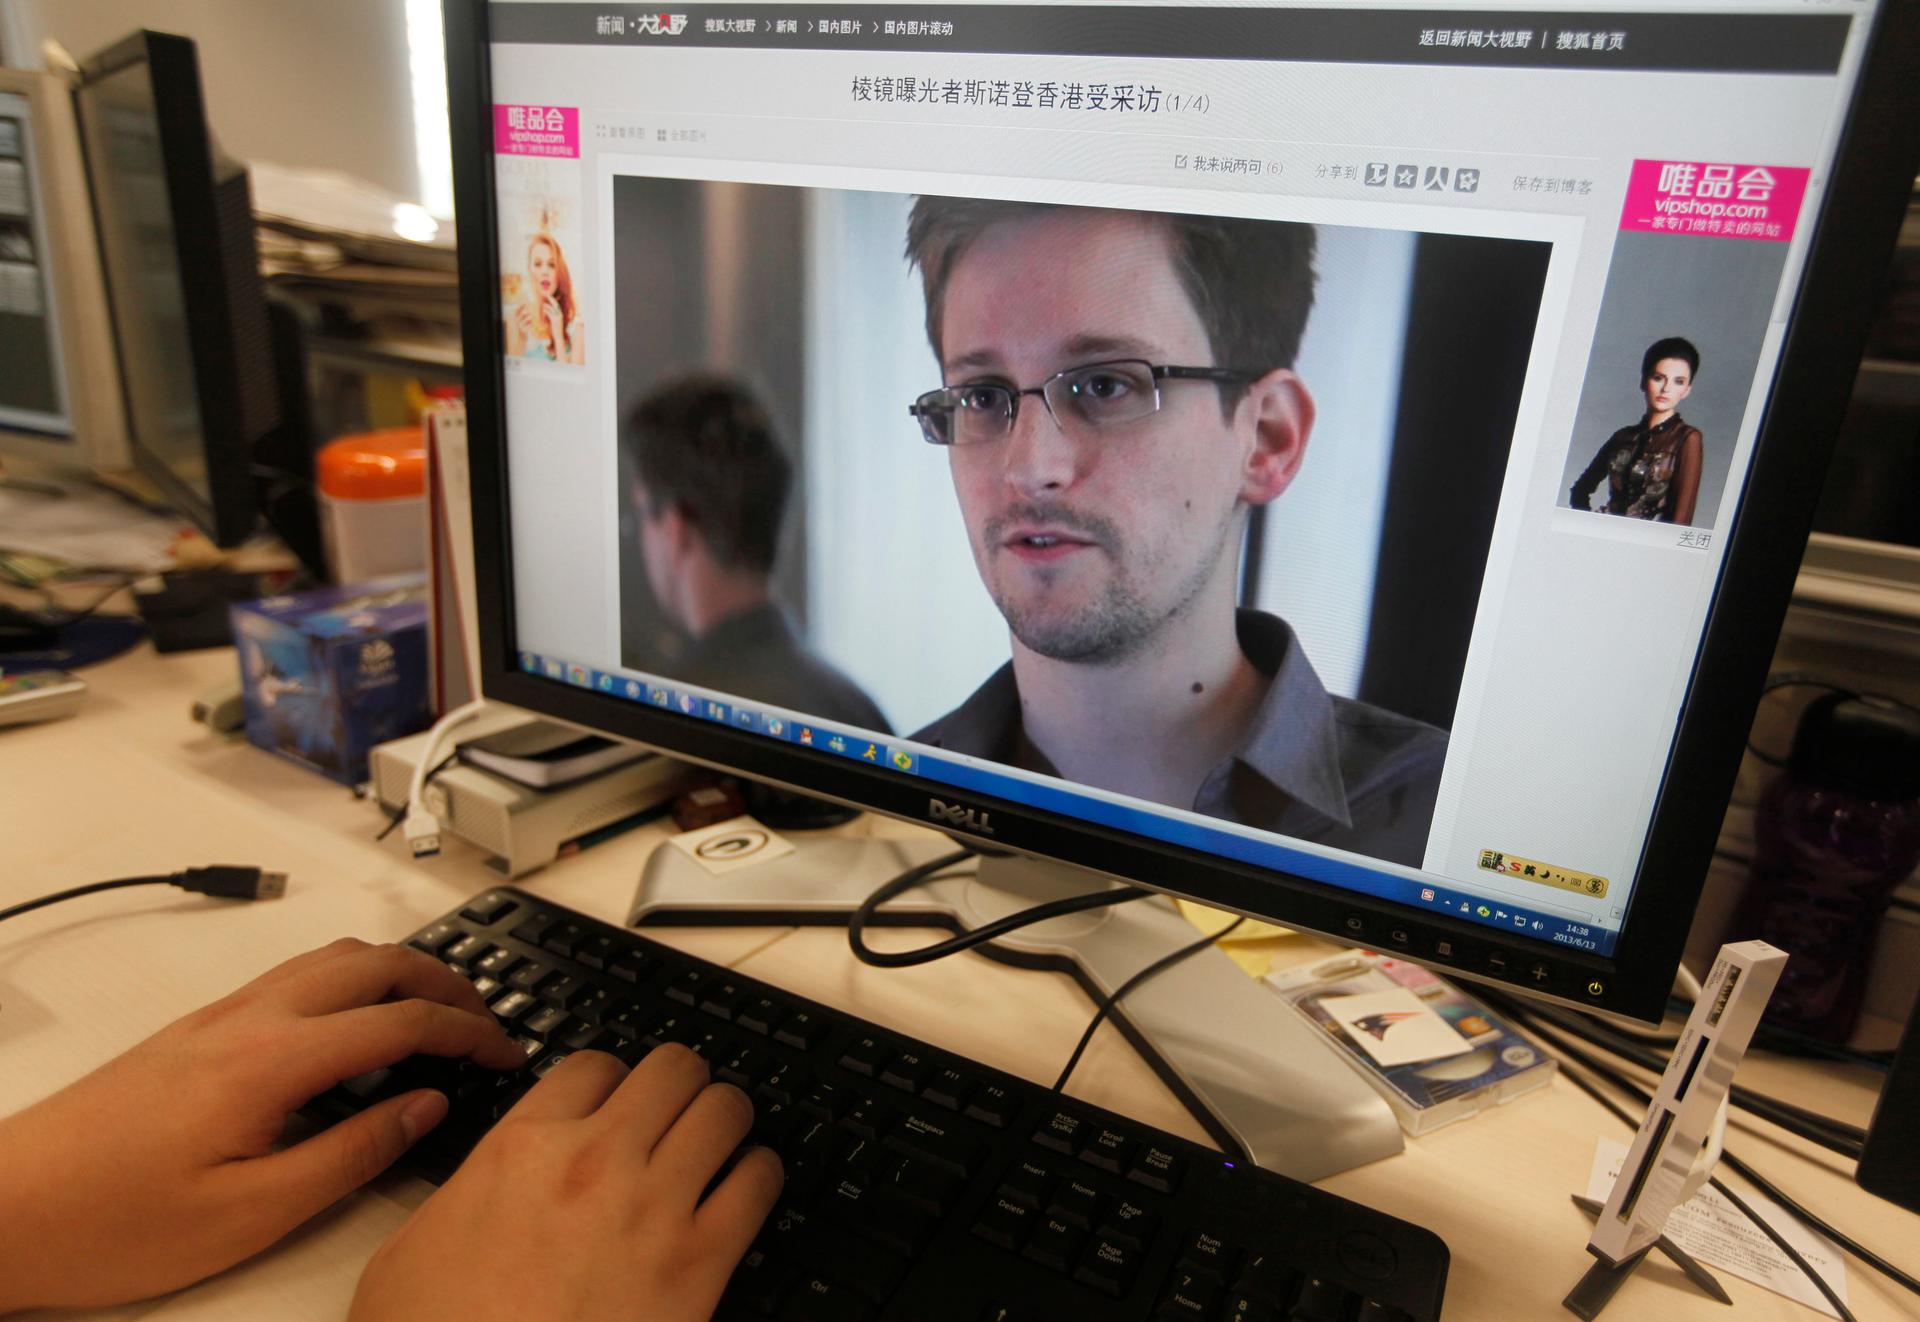 A picture of Edward Snowden, a contractor at the National Security Agency (NSA), is seen on a computer screen displaying a page of a Chinese news website.